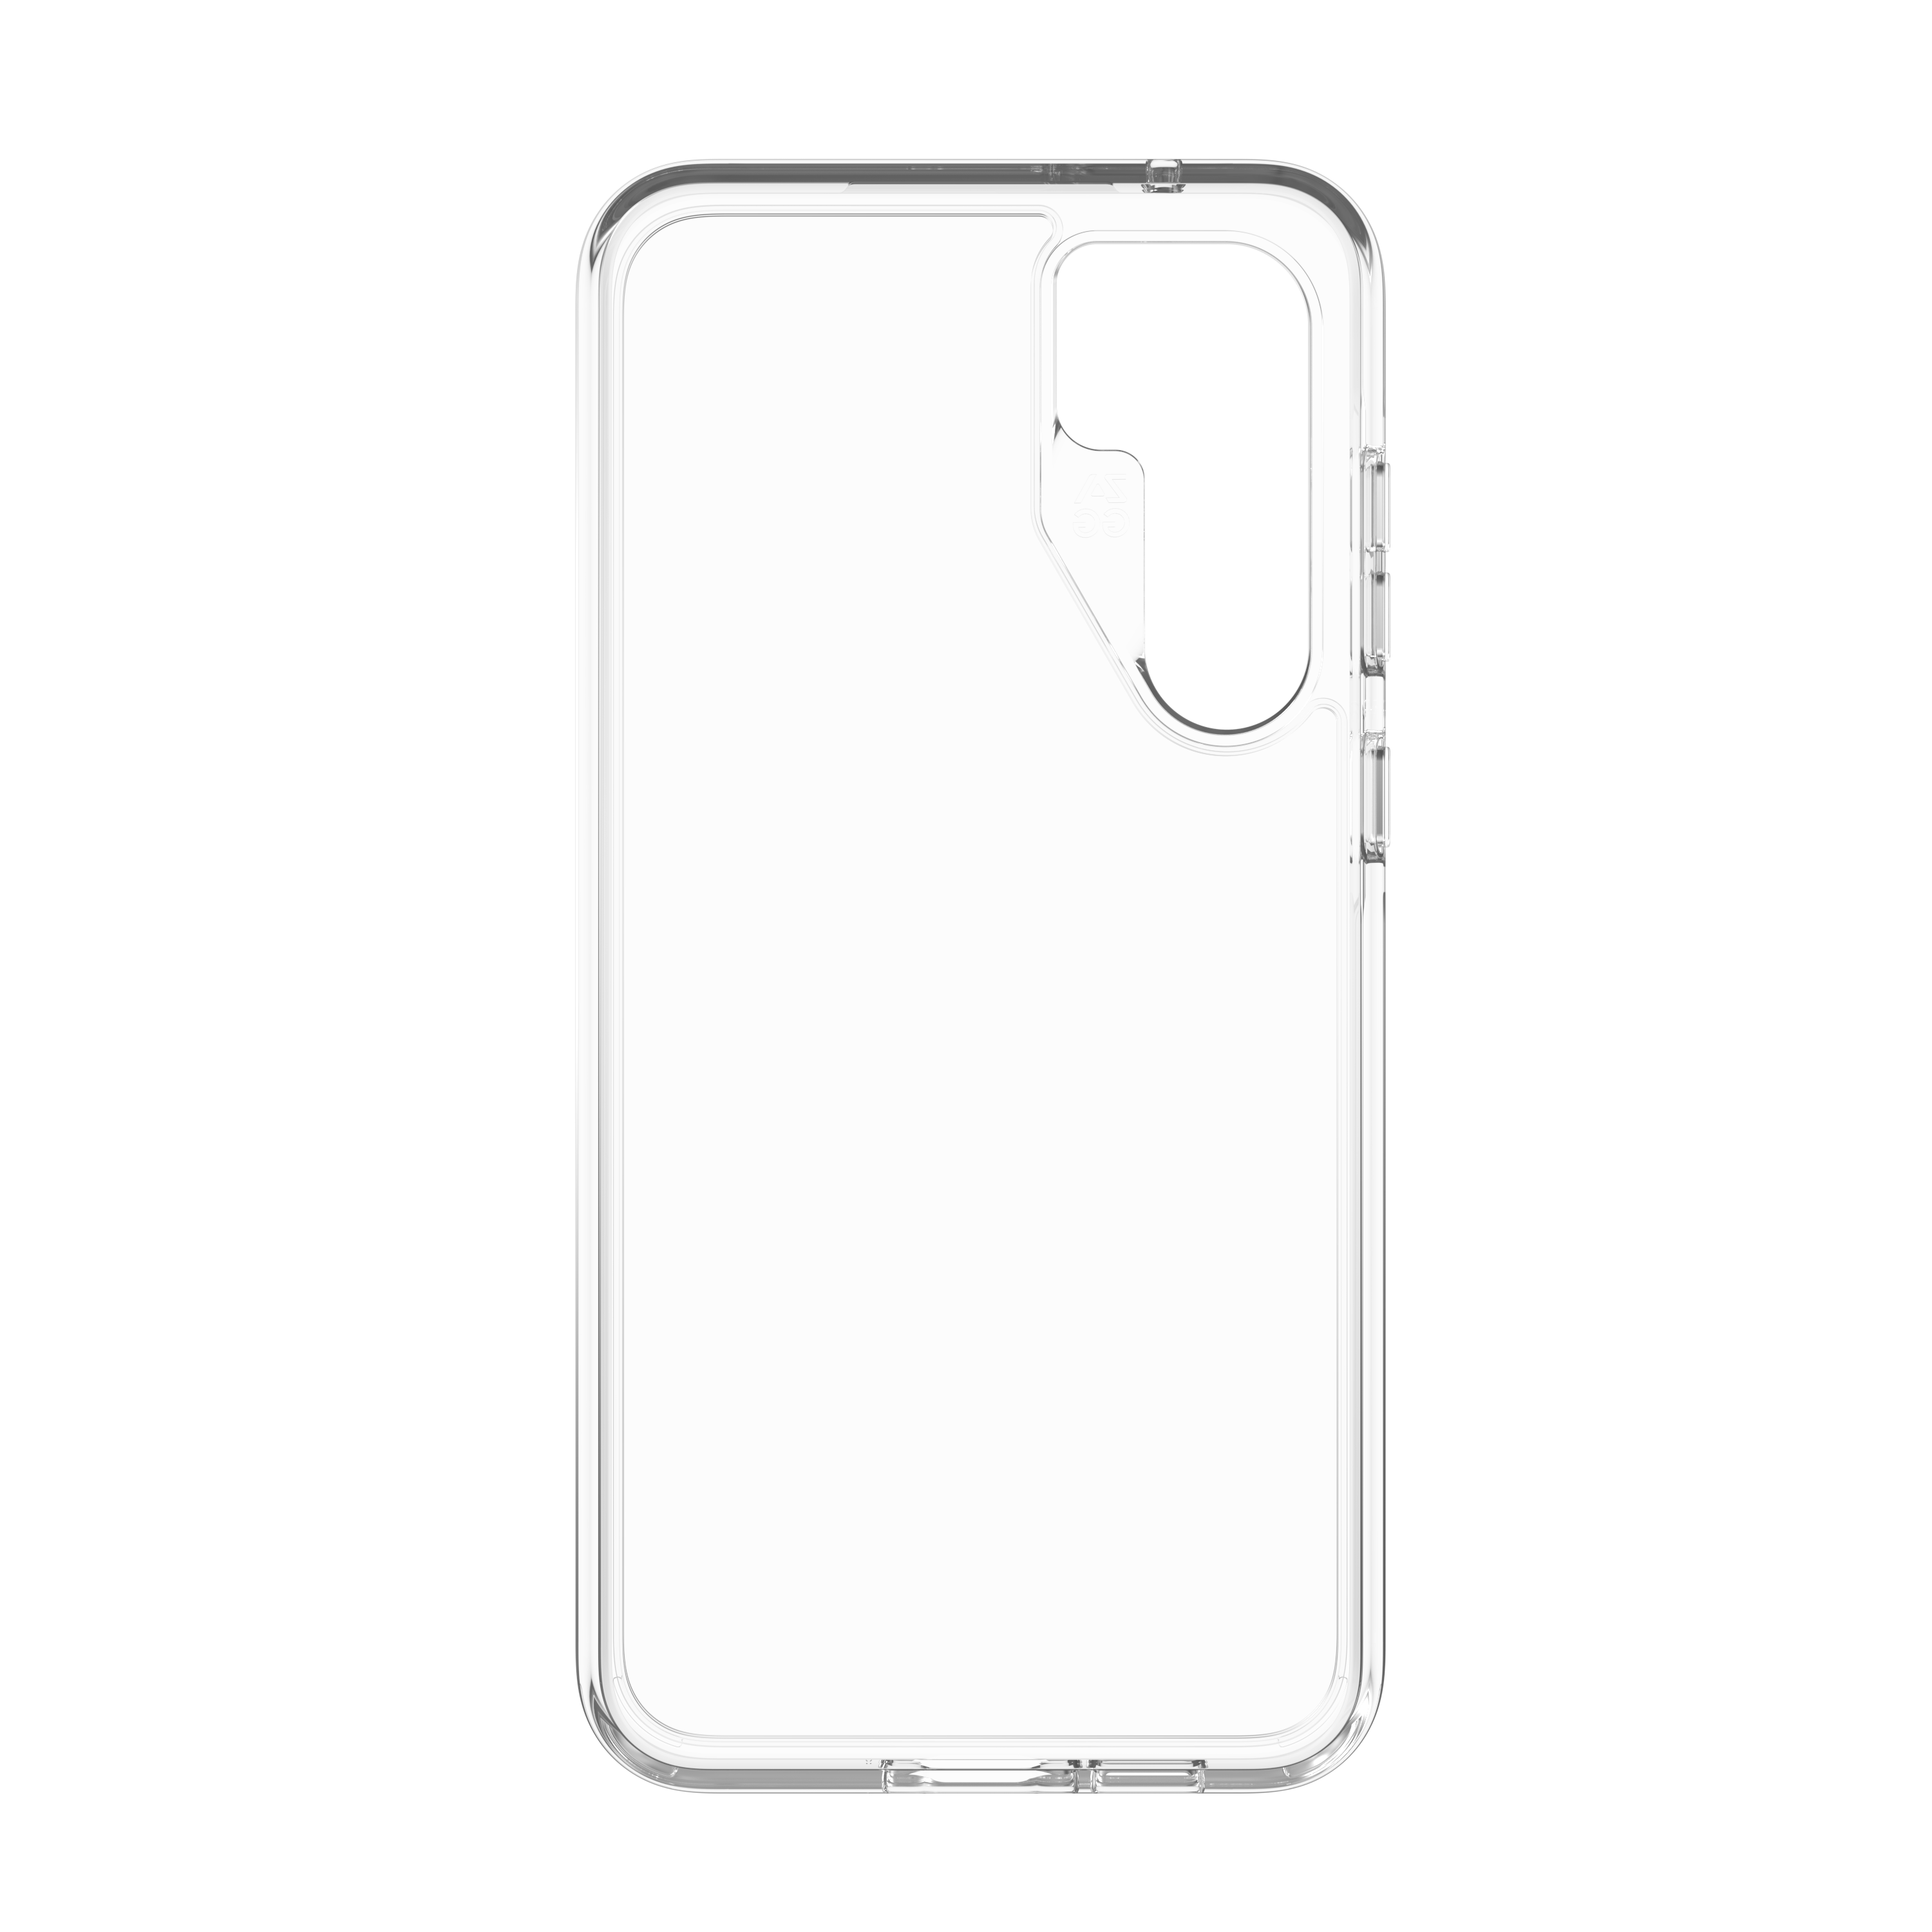 Crystal Clear Case
|| Crystal Palace has a transparent, scratch-resistant surface with anti-yellowing properties.